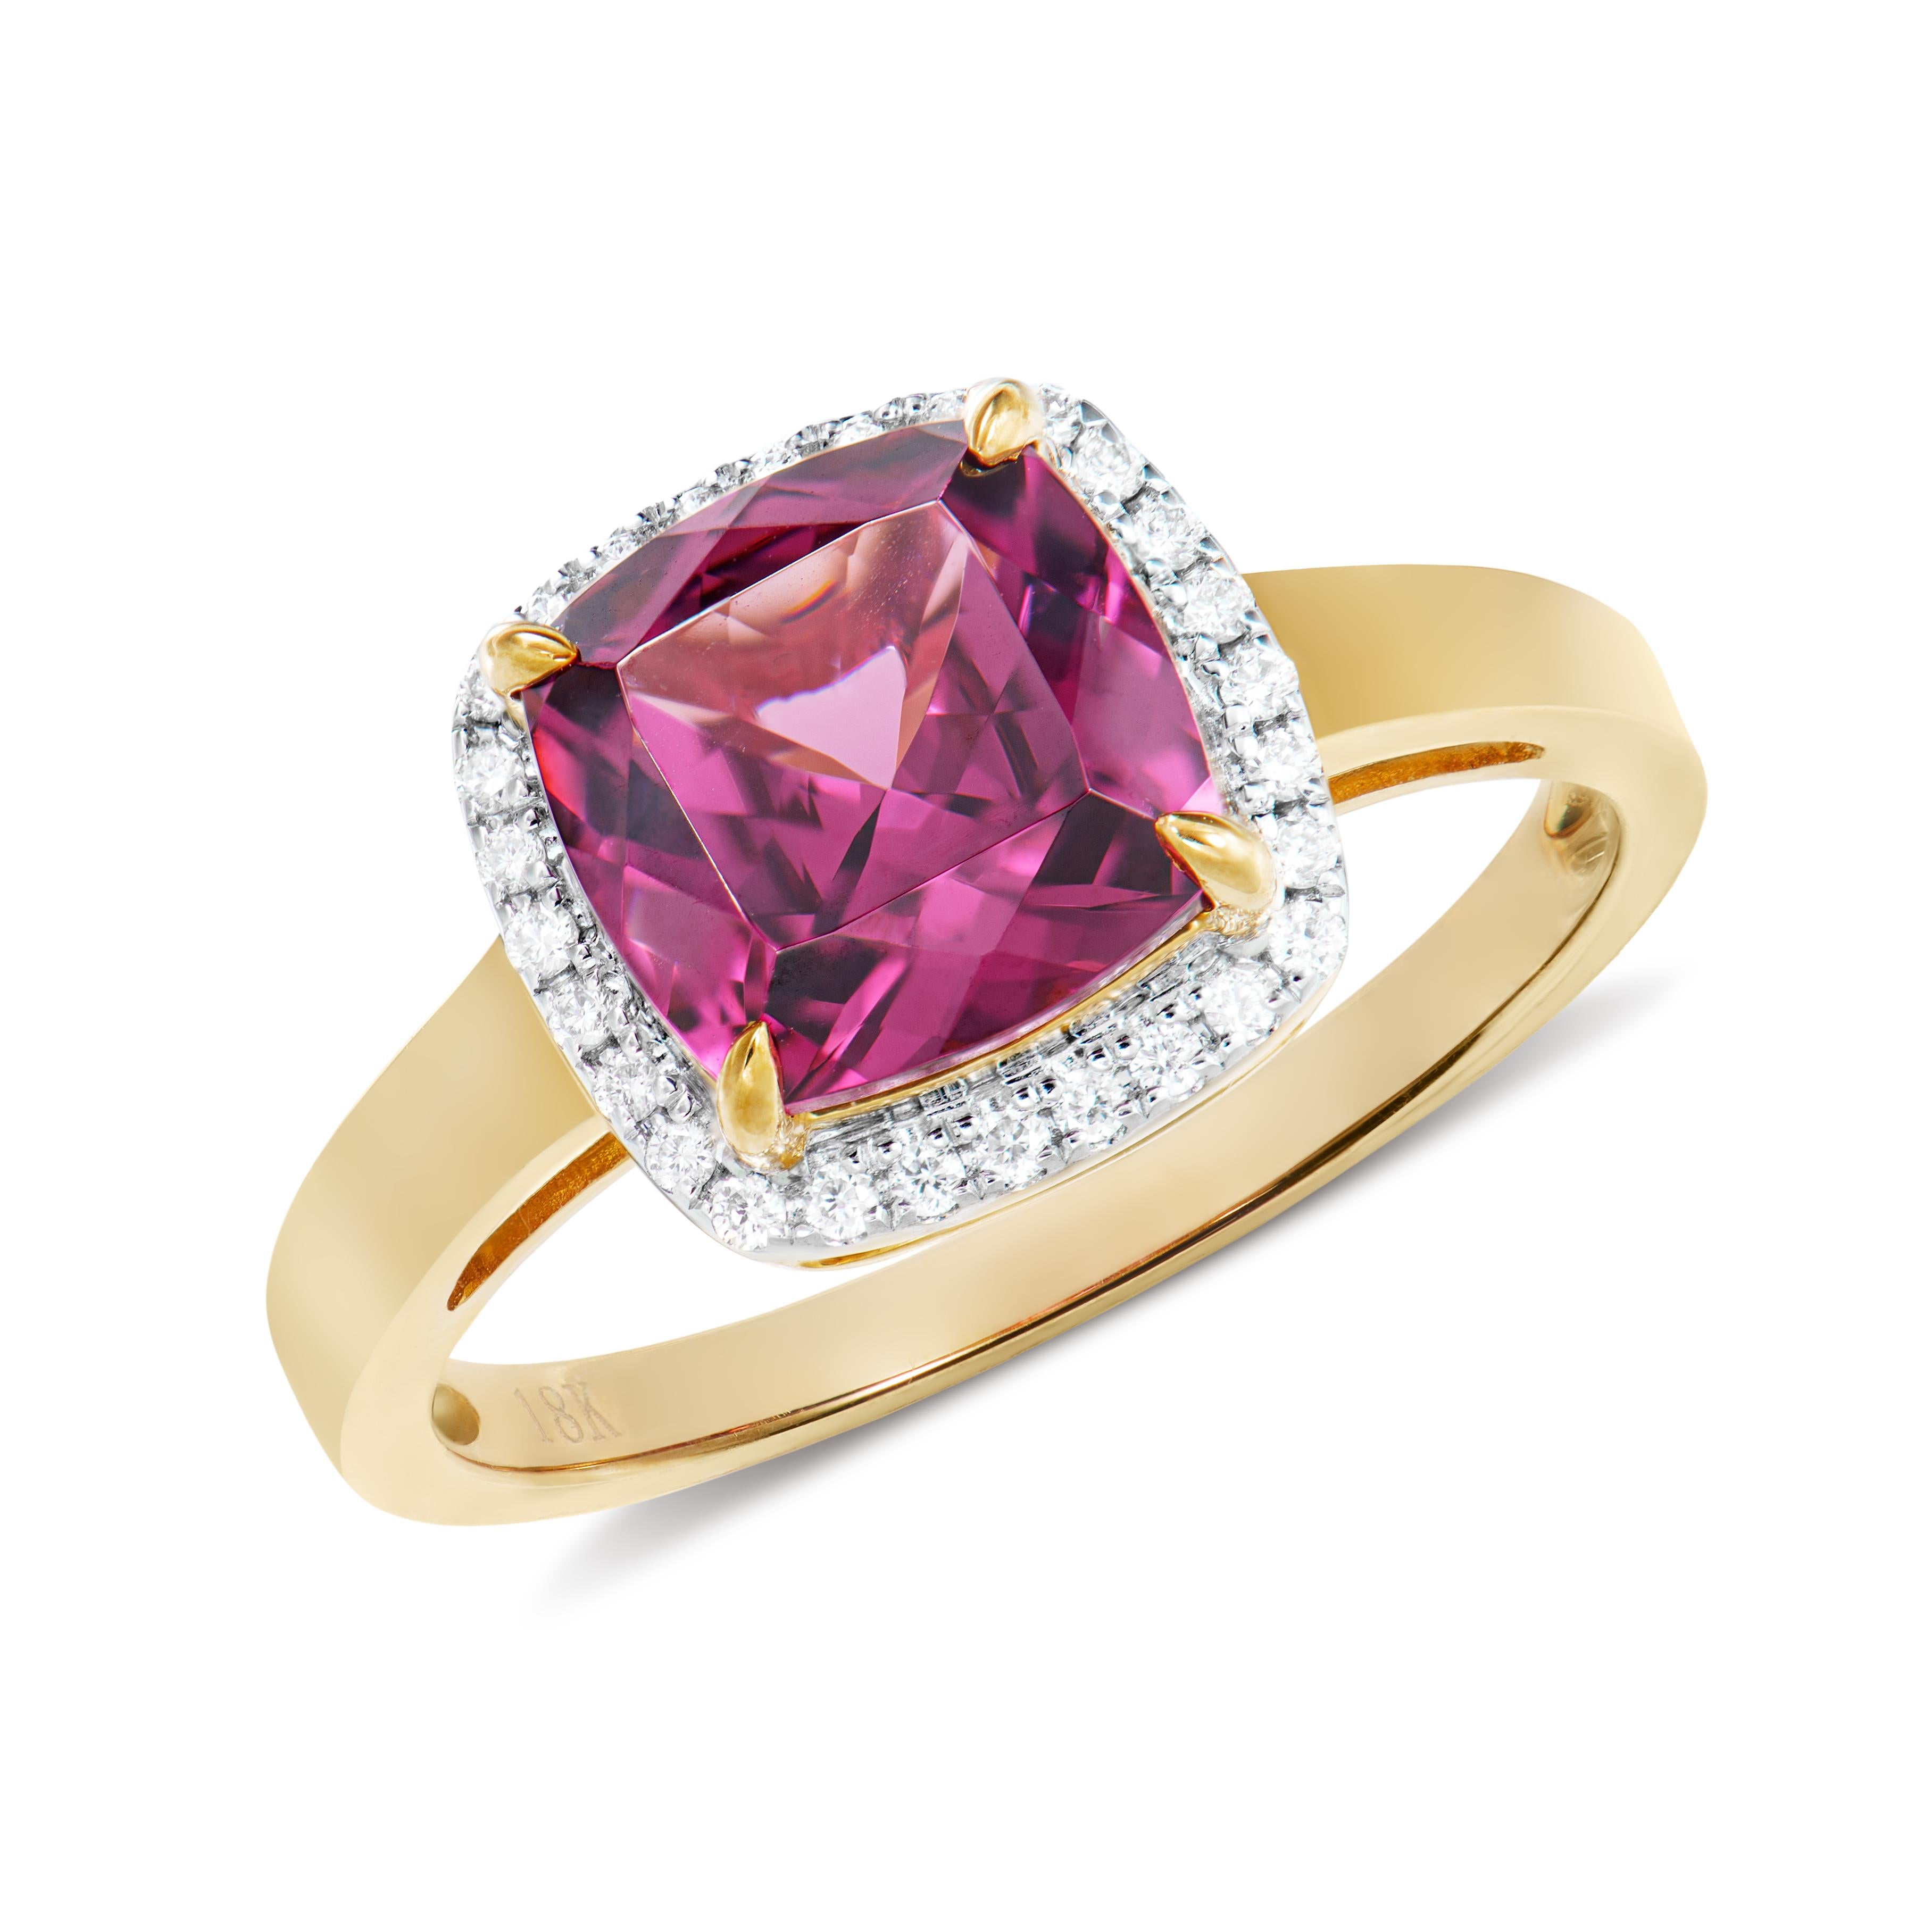 Contemporary 2.80 Carat Rhodolite Fancy Ring in 18Karat Yellow Gold with White Diamond.   For Sale